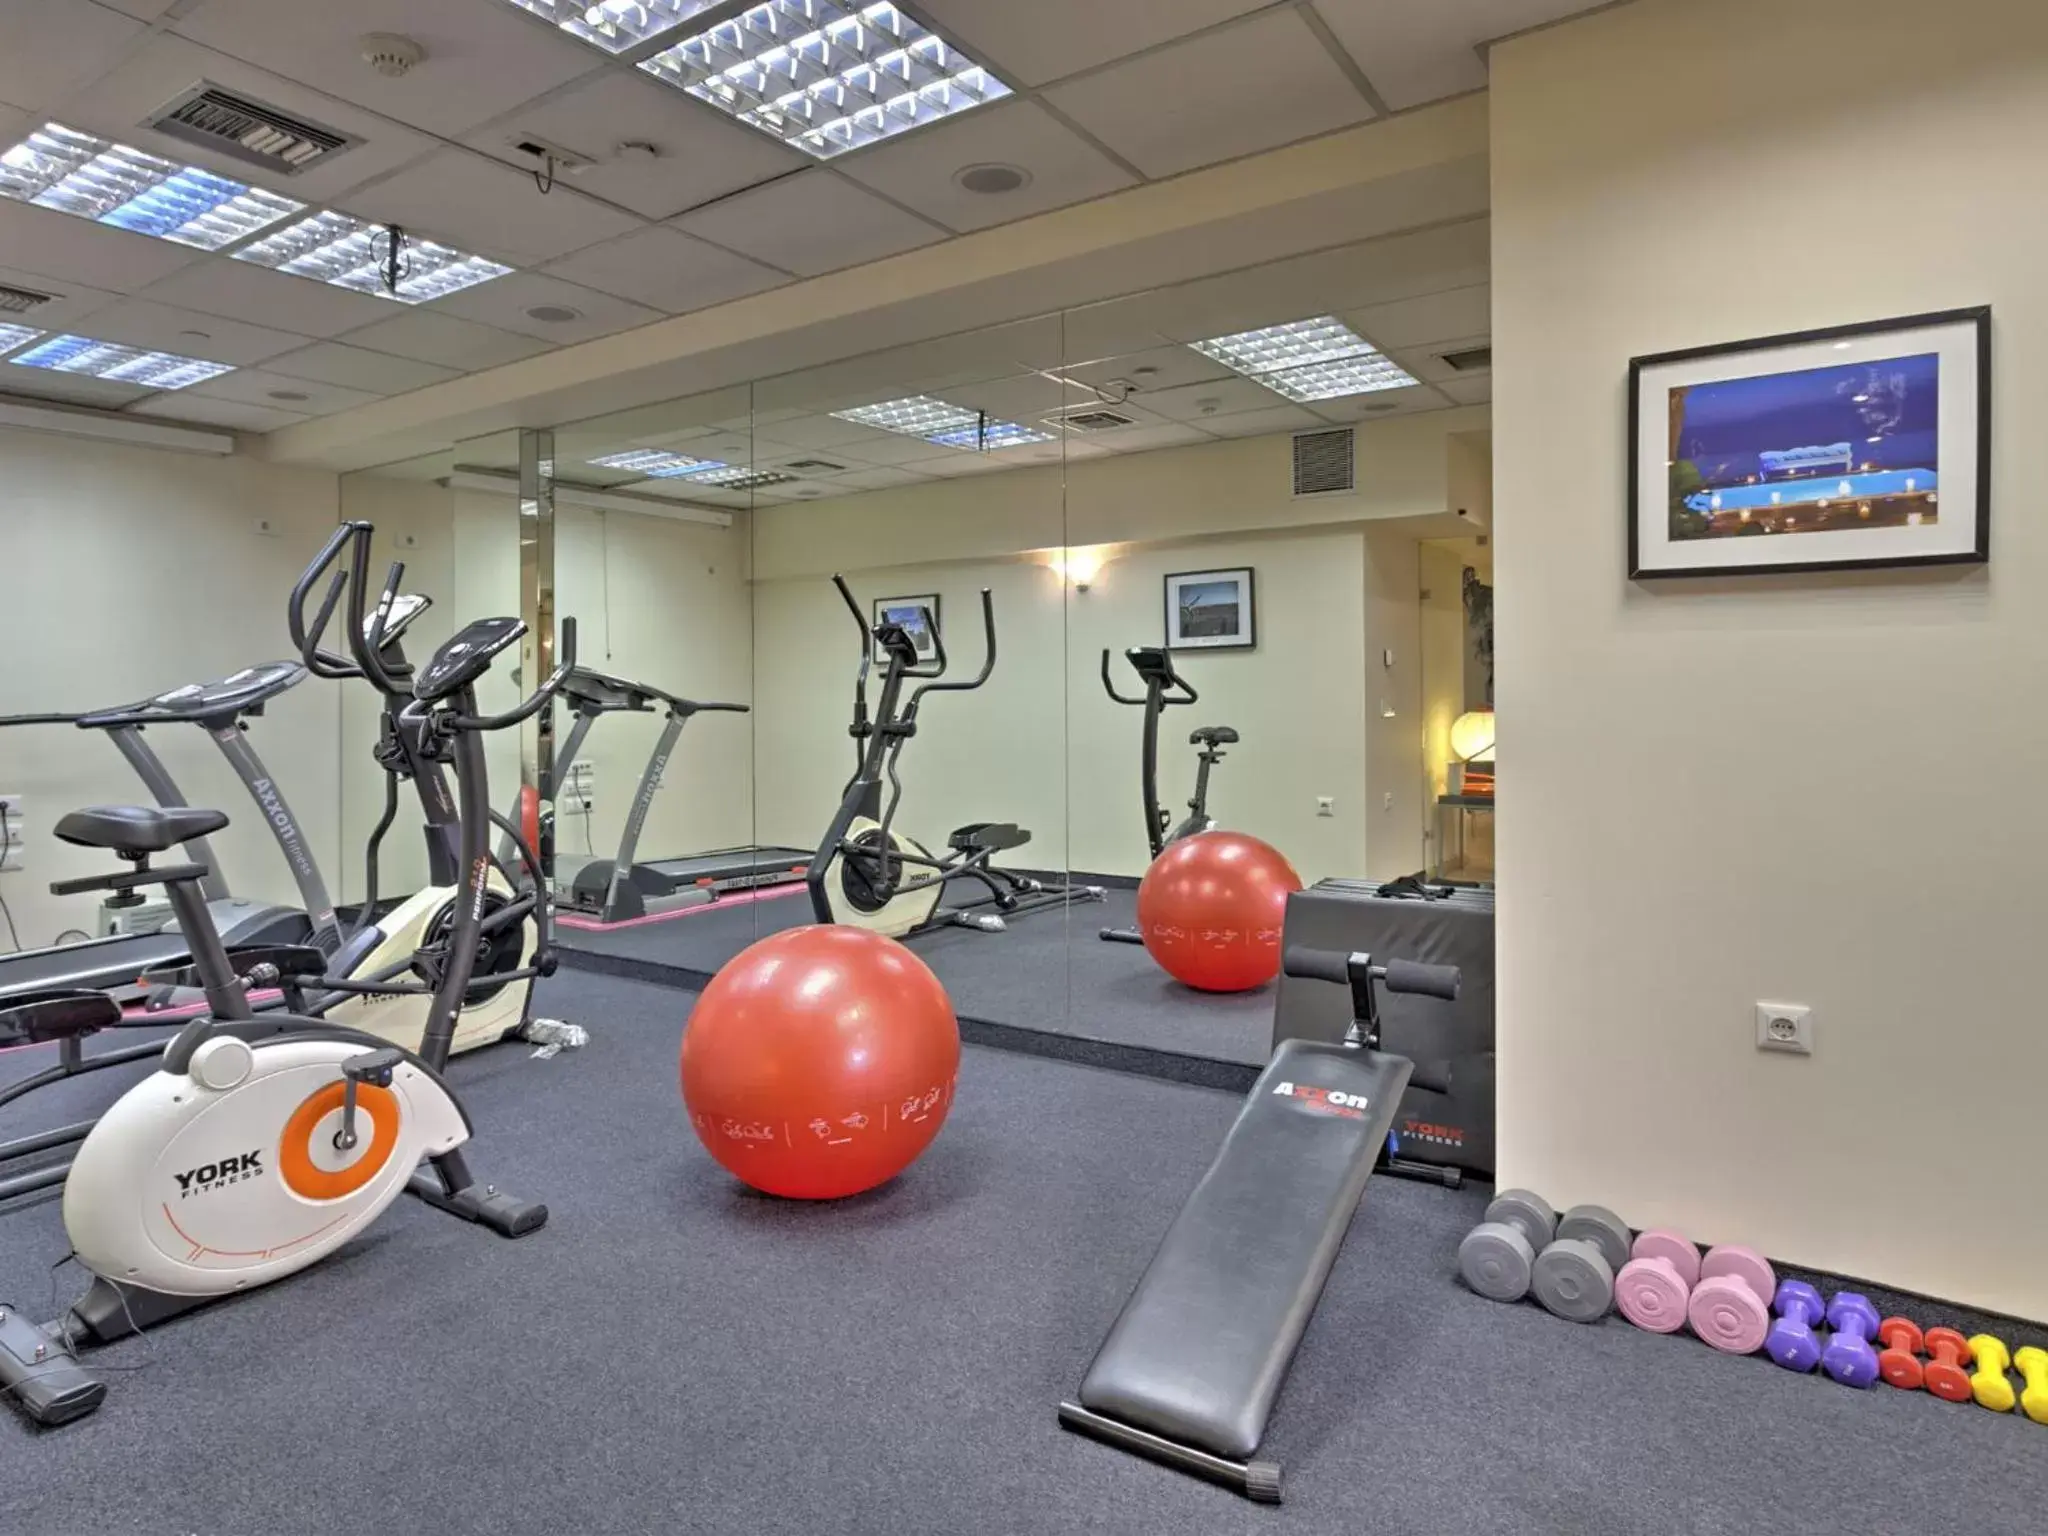 Fitness centre/facilities, Fitness Center/Facilities in Polis Grand Hotel